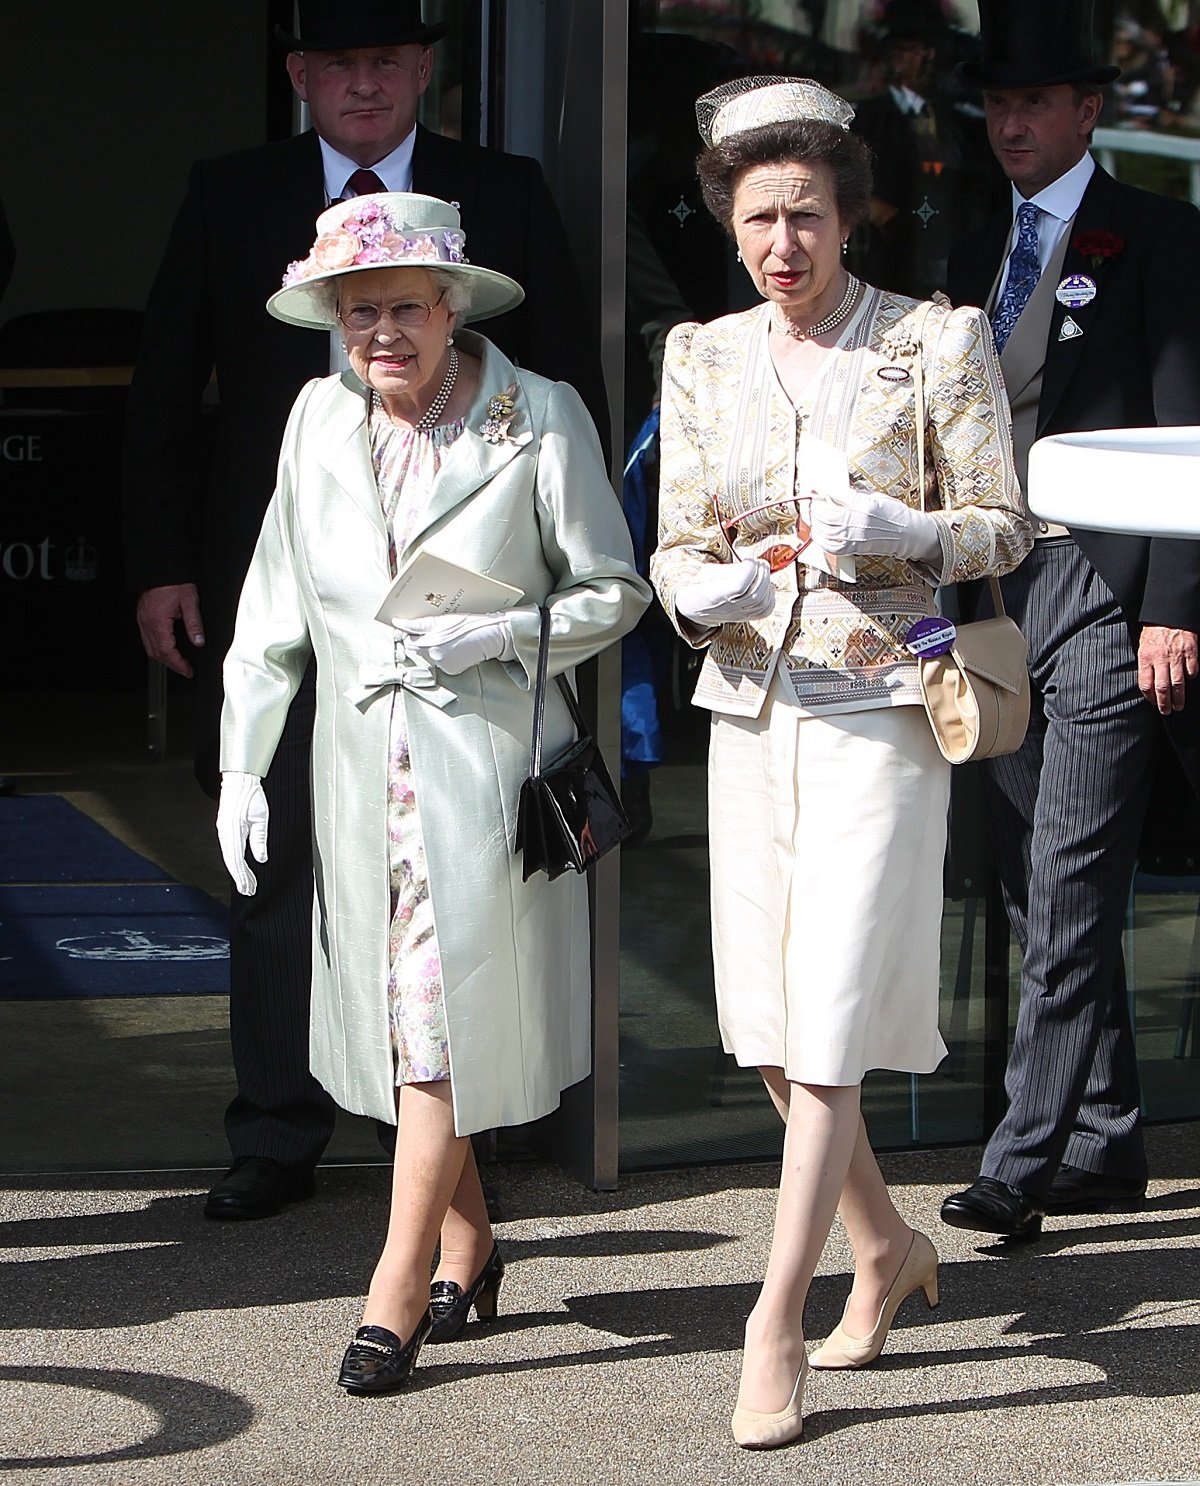 Queen Elizabeth II and Princess Anne attending Day Two of Royal Ascot Meeting at Ascot Racecourse together